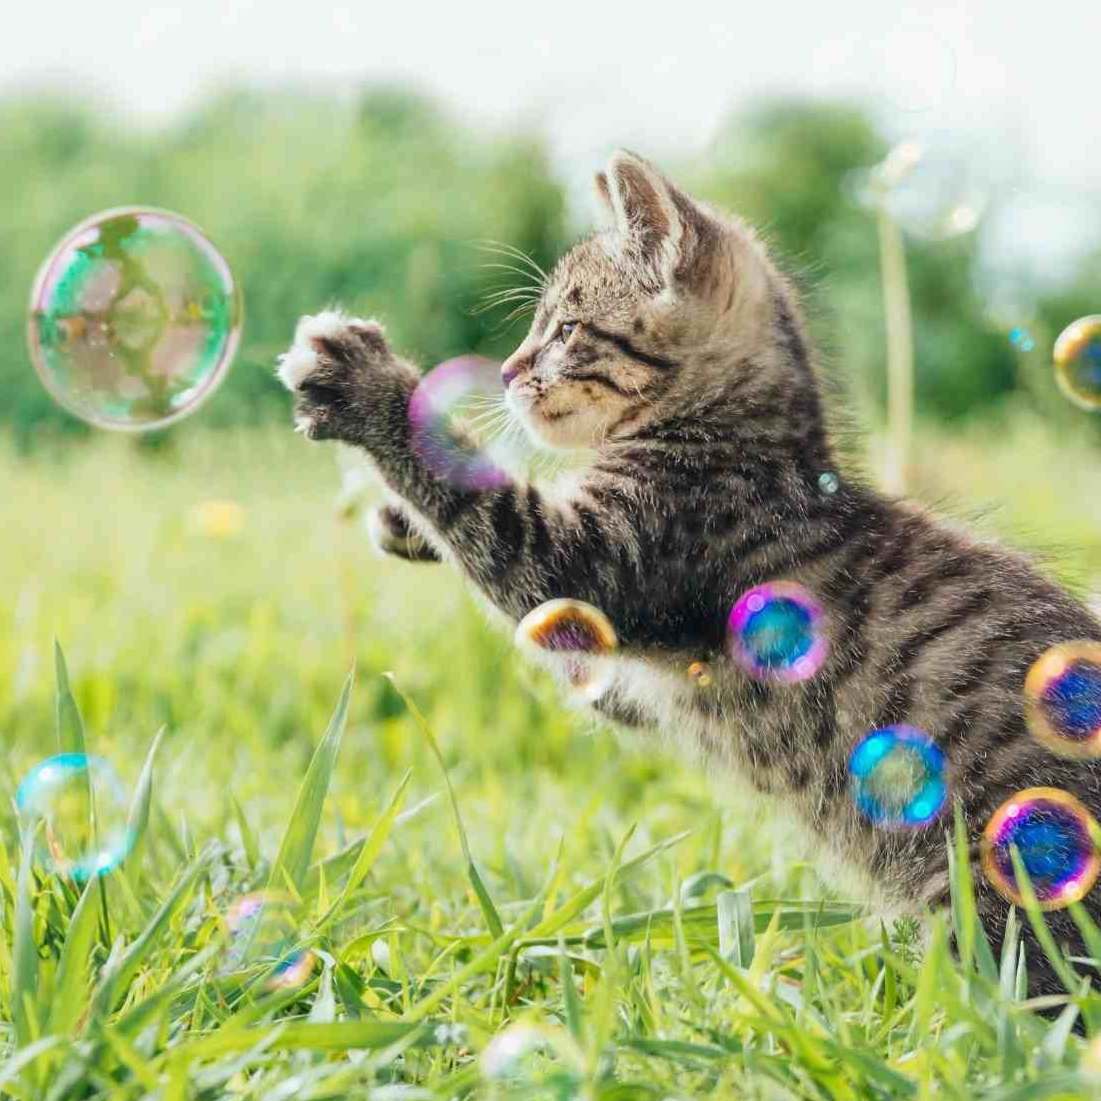 Kitten playing with soap bubbles on green field in summer, side view